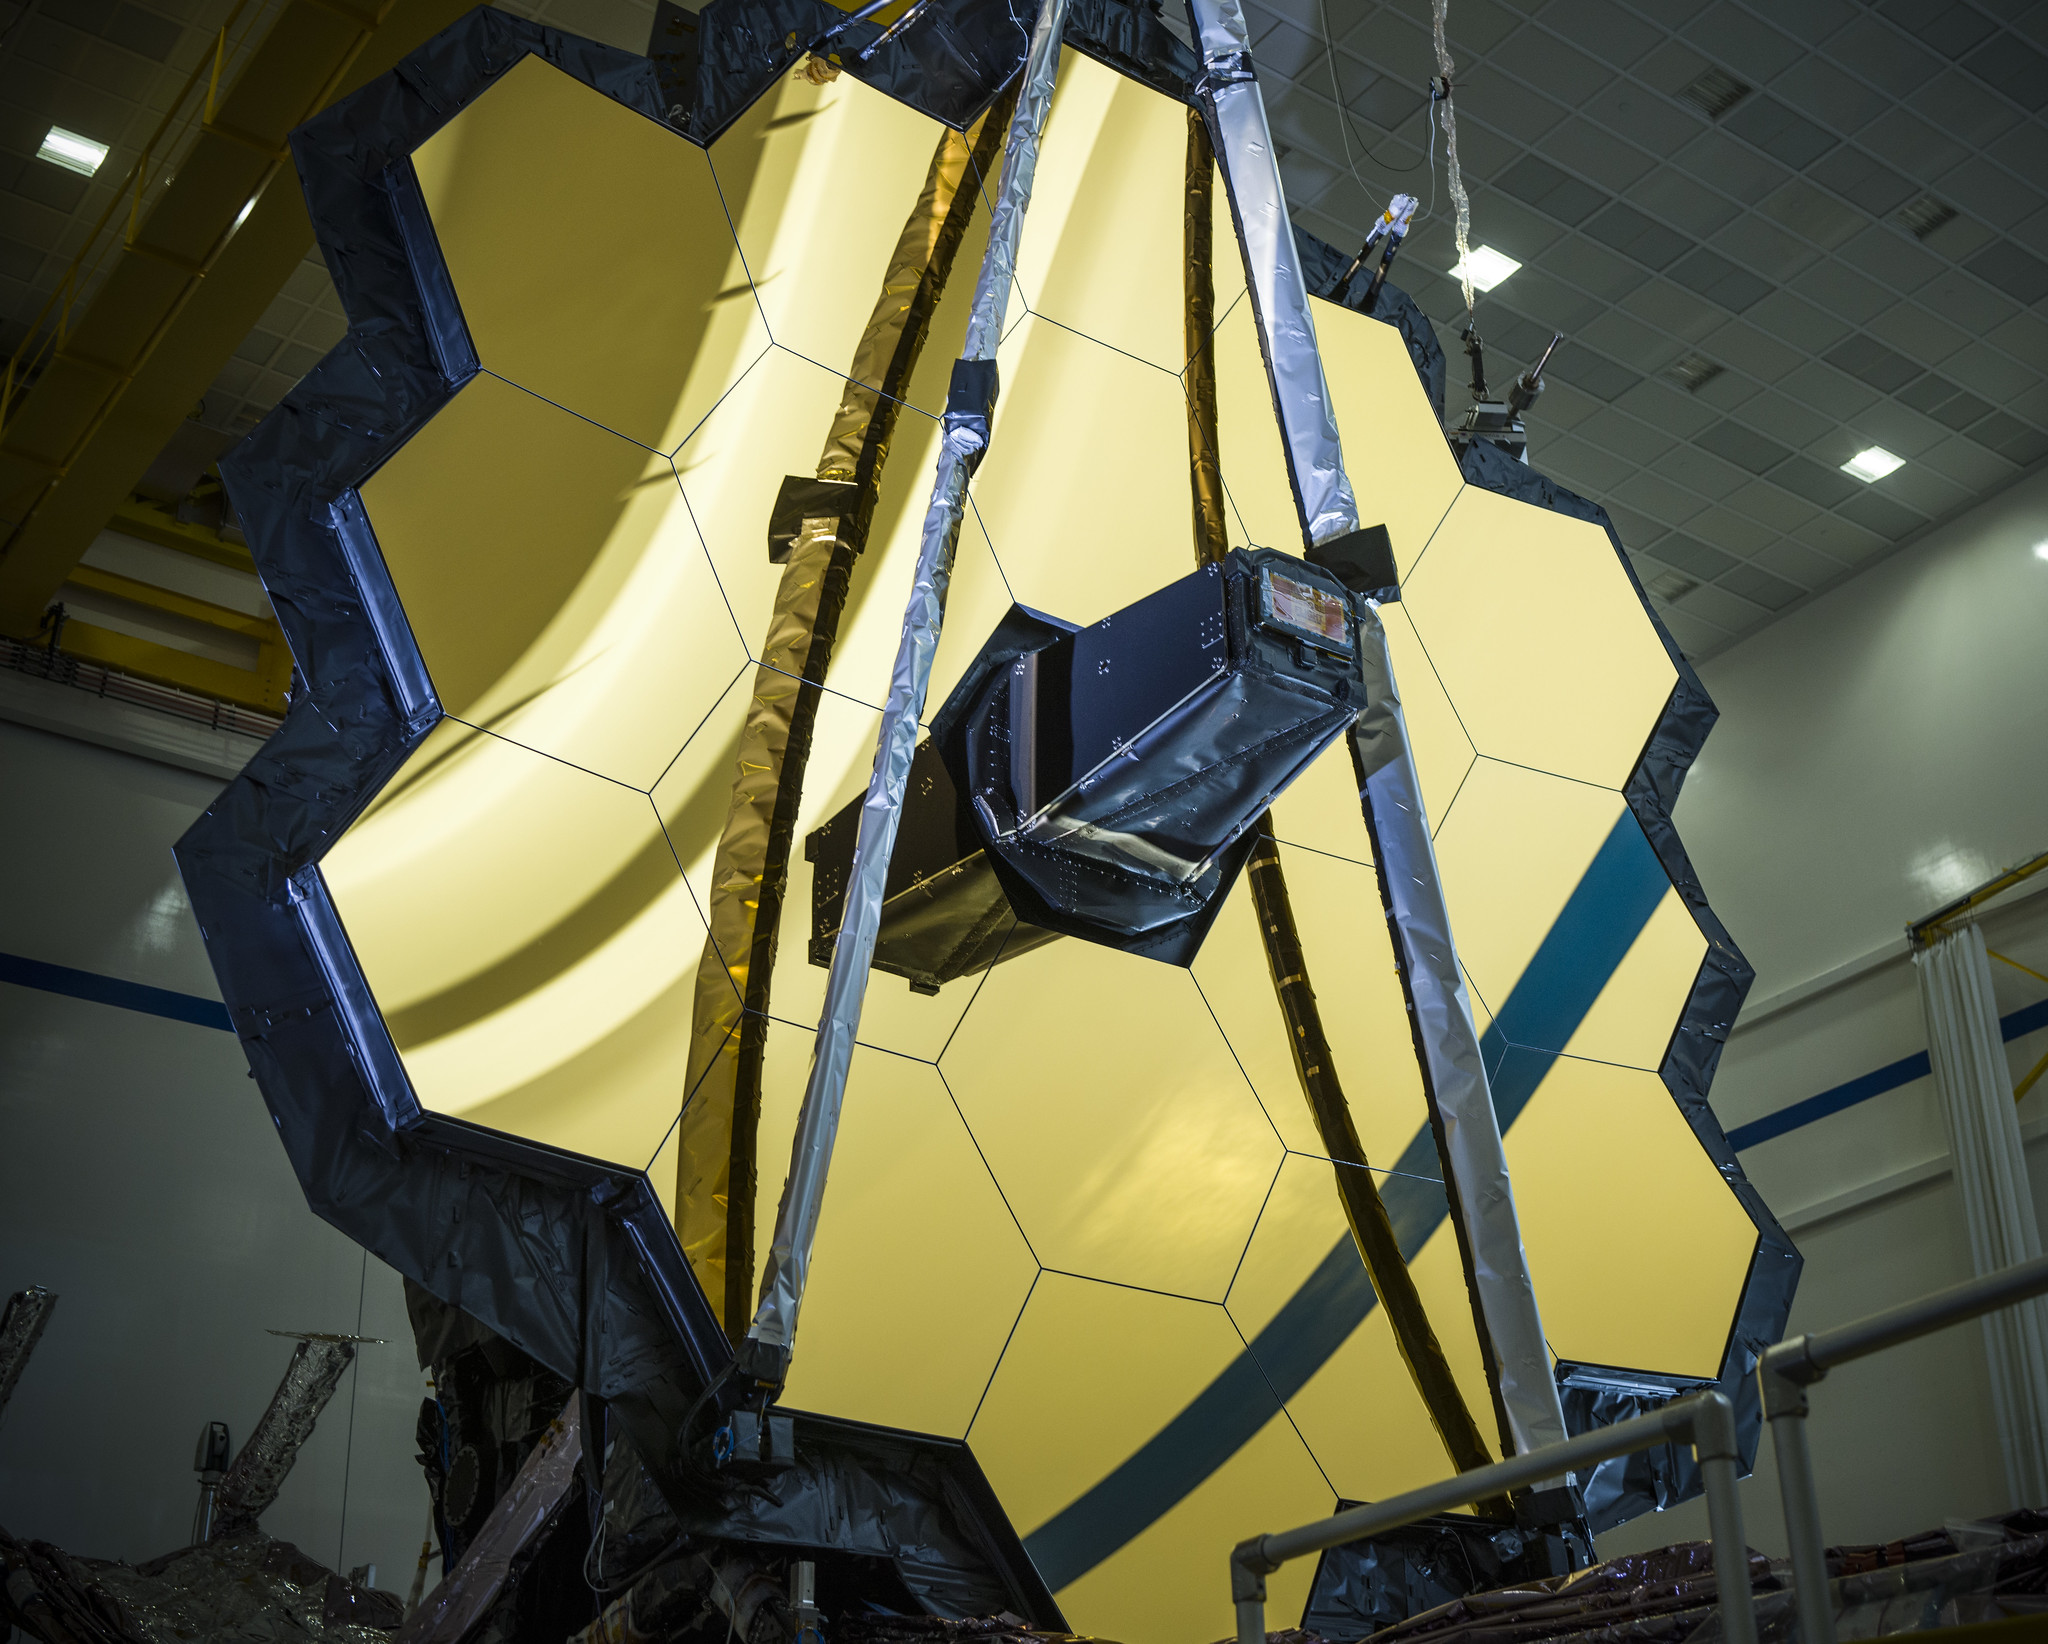 An image of the James Webb Space Telescope taken on March 5, 2020.